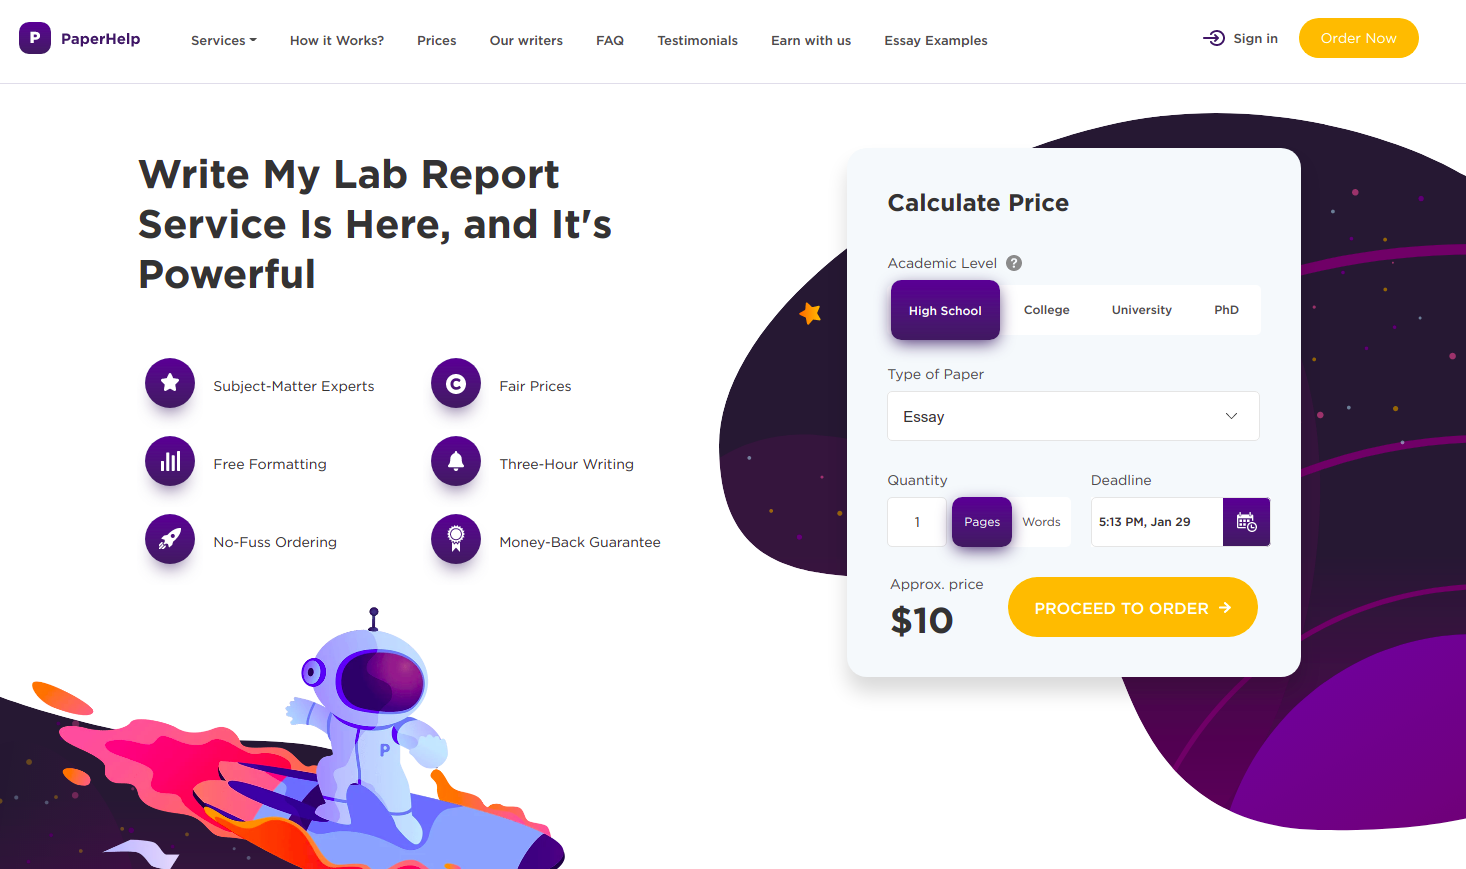 Top 5 lab report writing sites in the United States: Analysis based on reviews